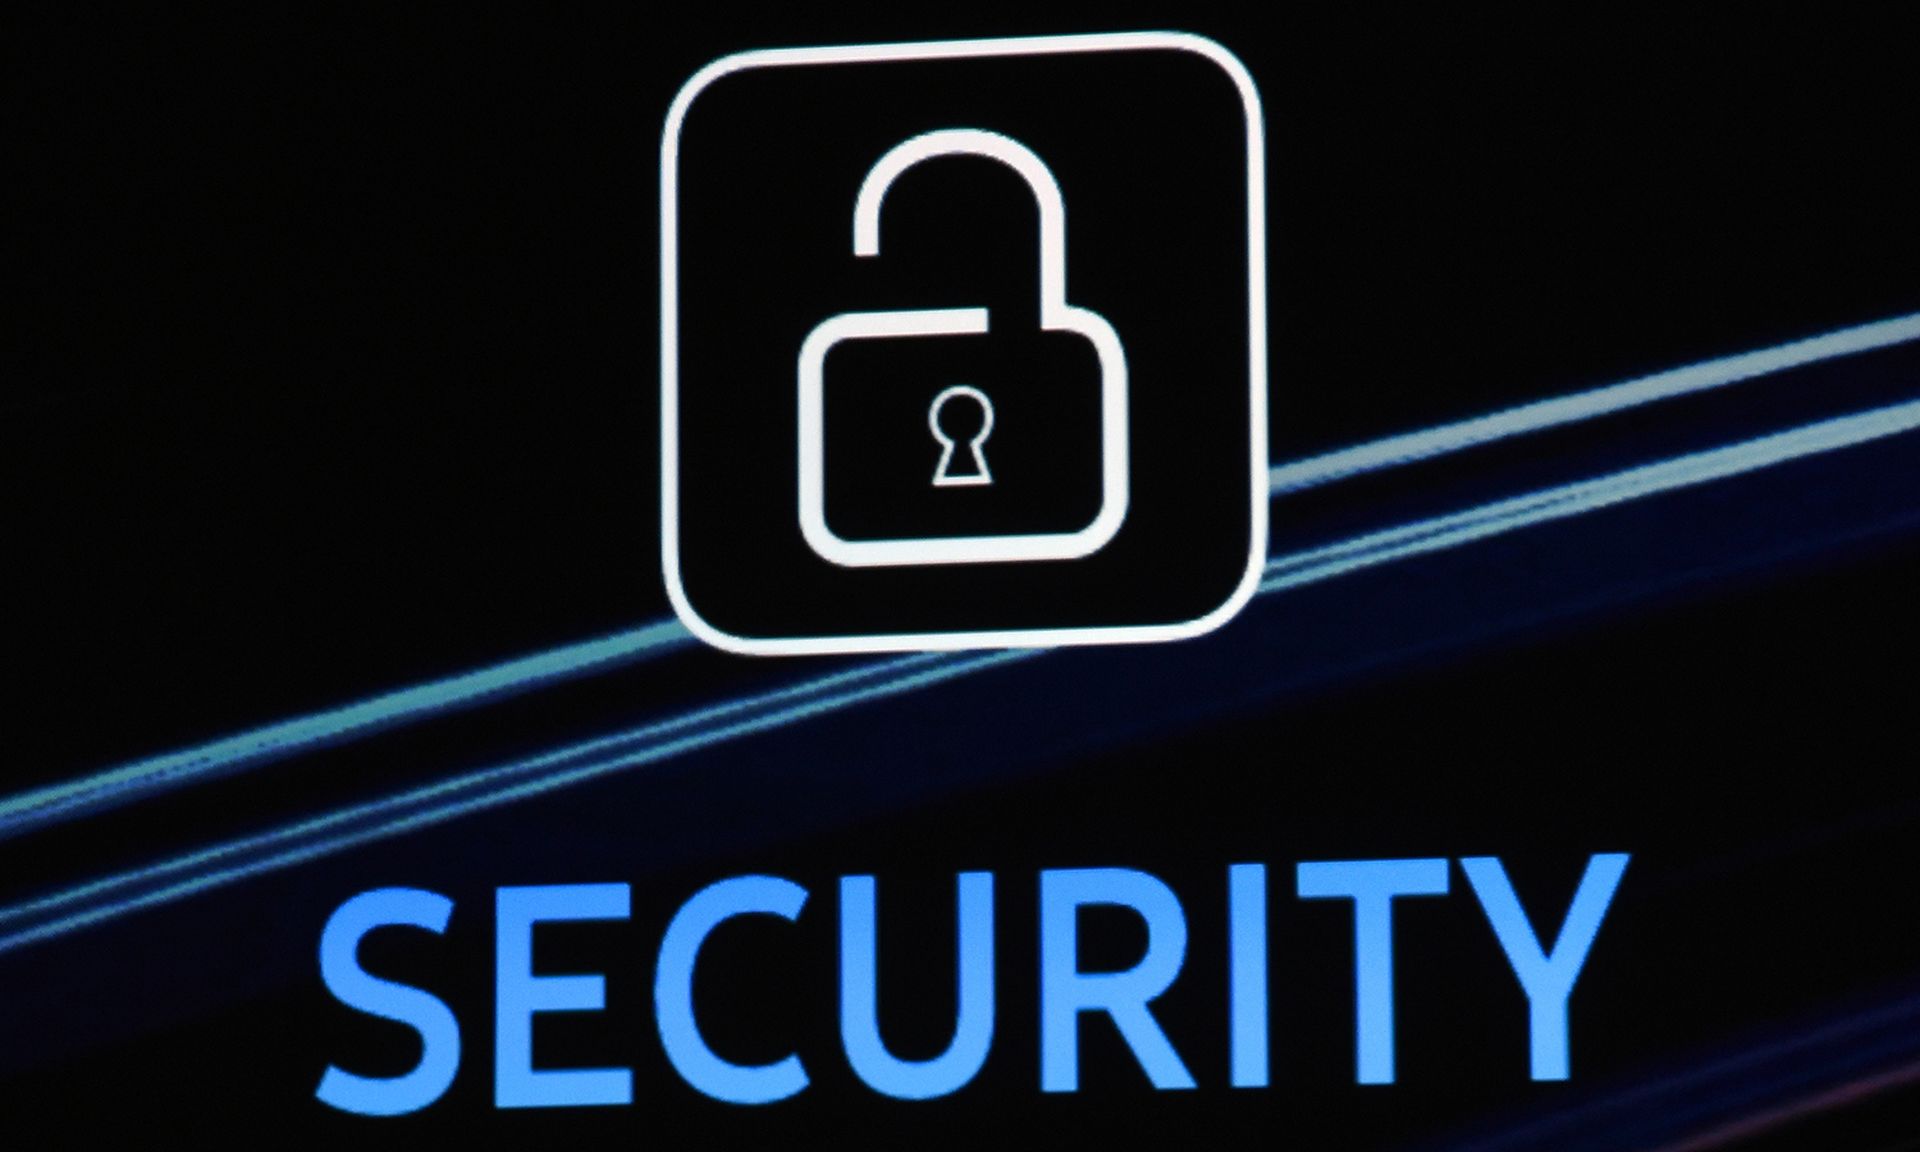 A security logo is shown on screen